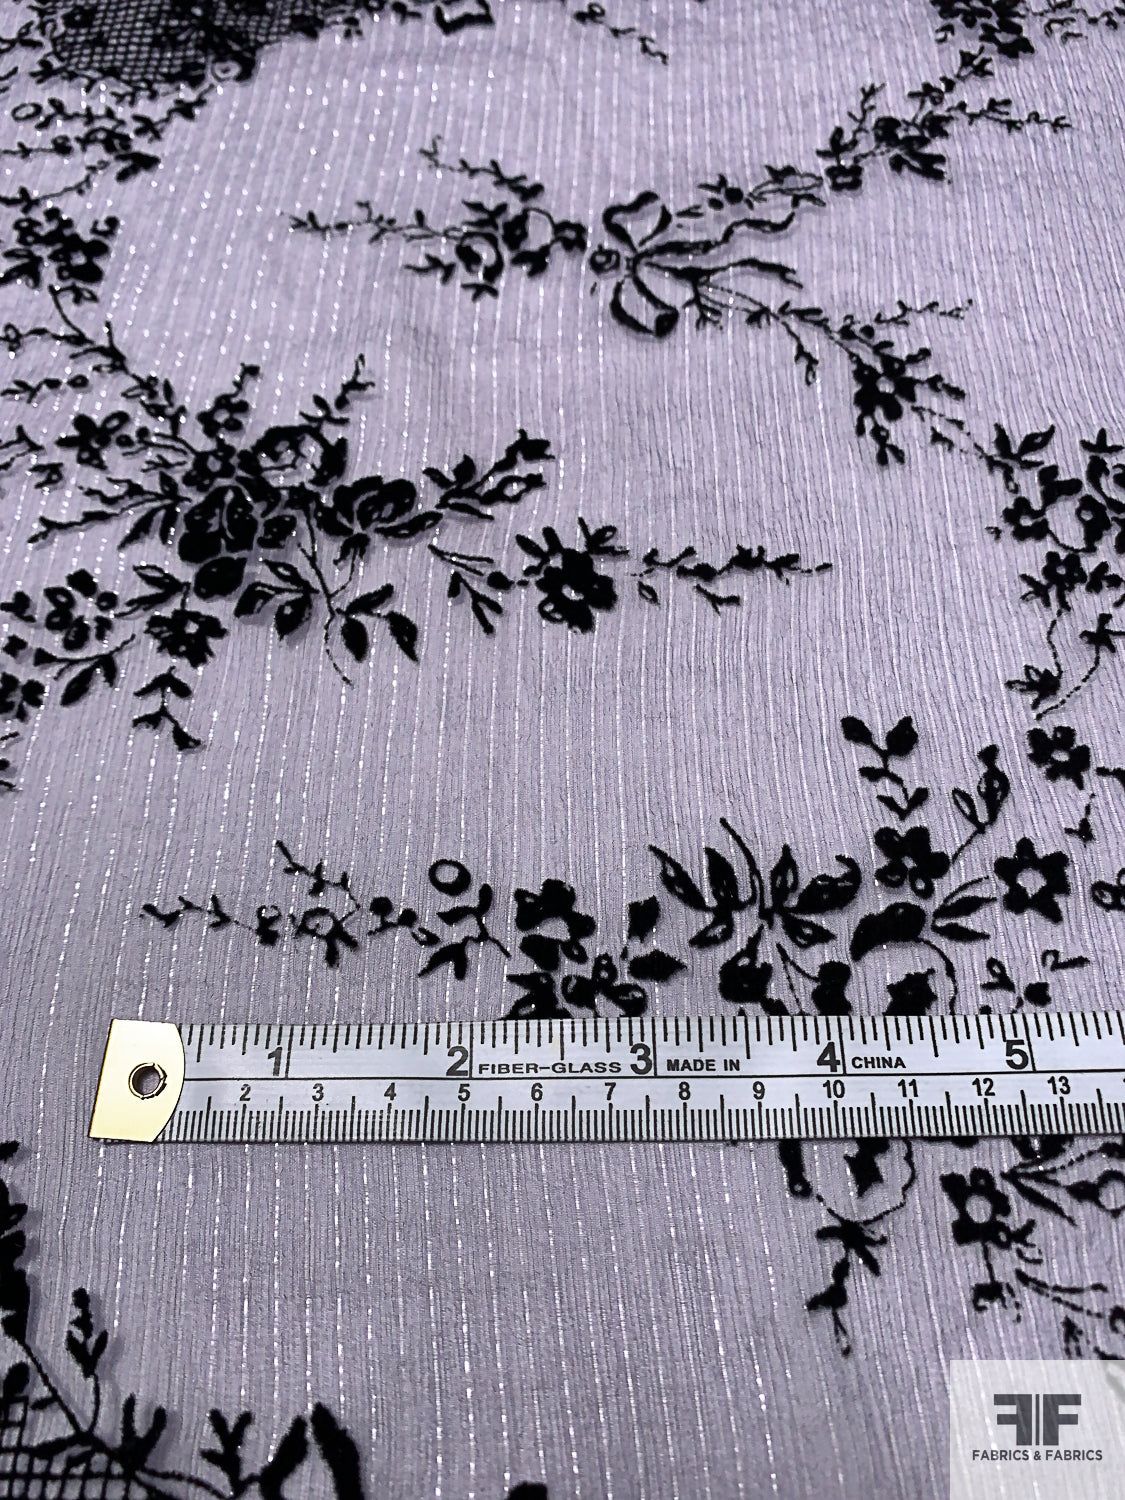 Flocked Intricate Floral Silk Chiffon with Lurex Pinstripes - Dusty Lilac / Black / Silver